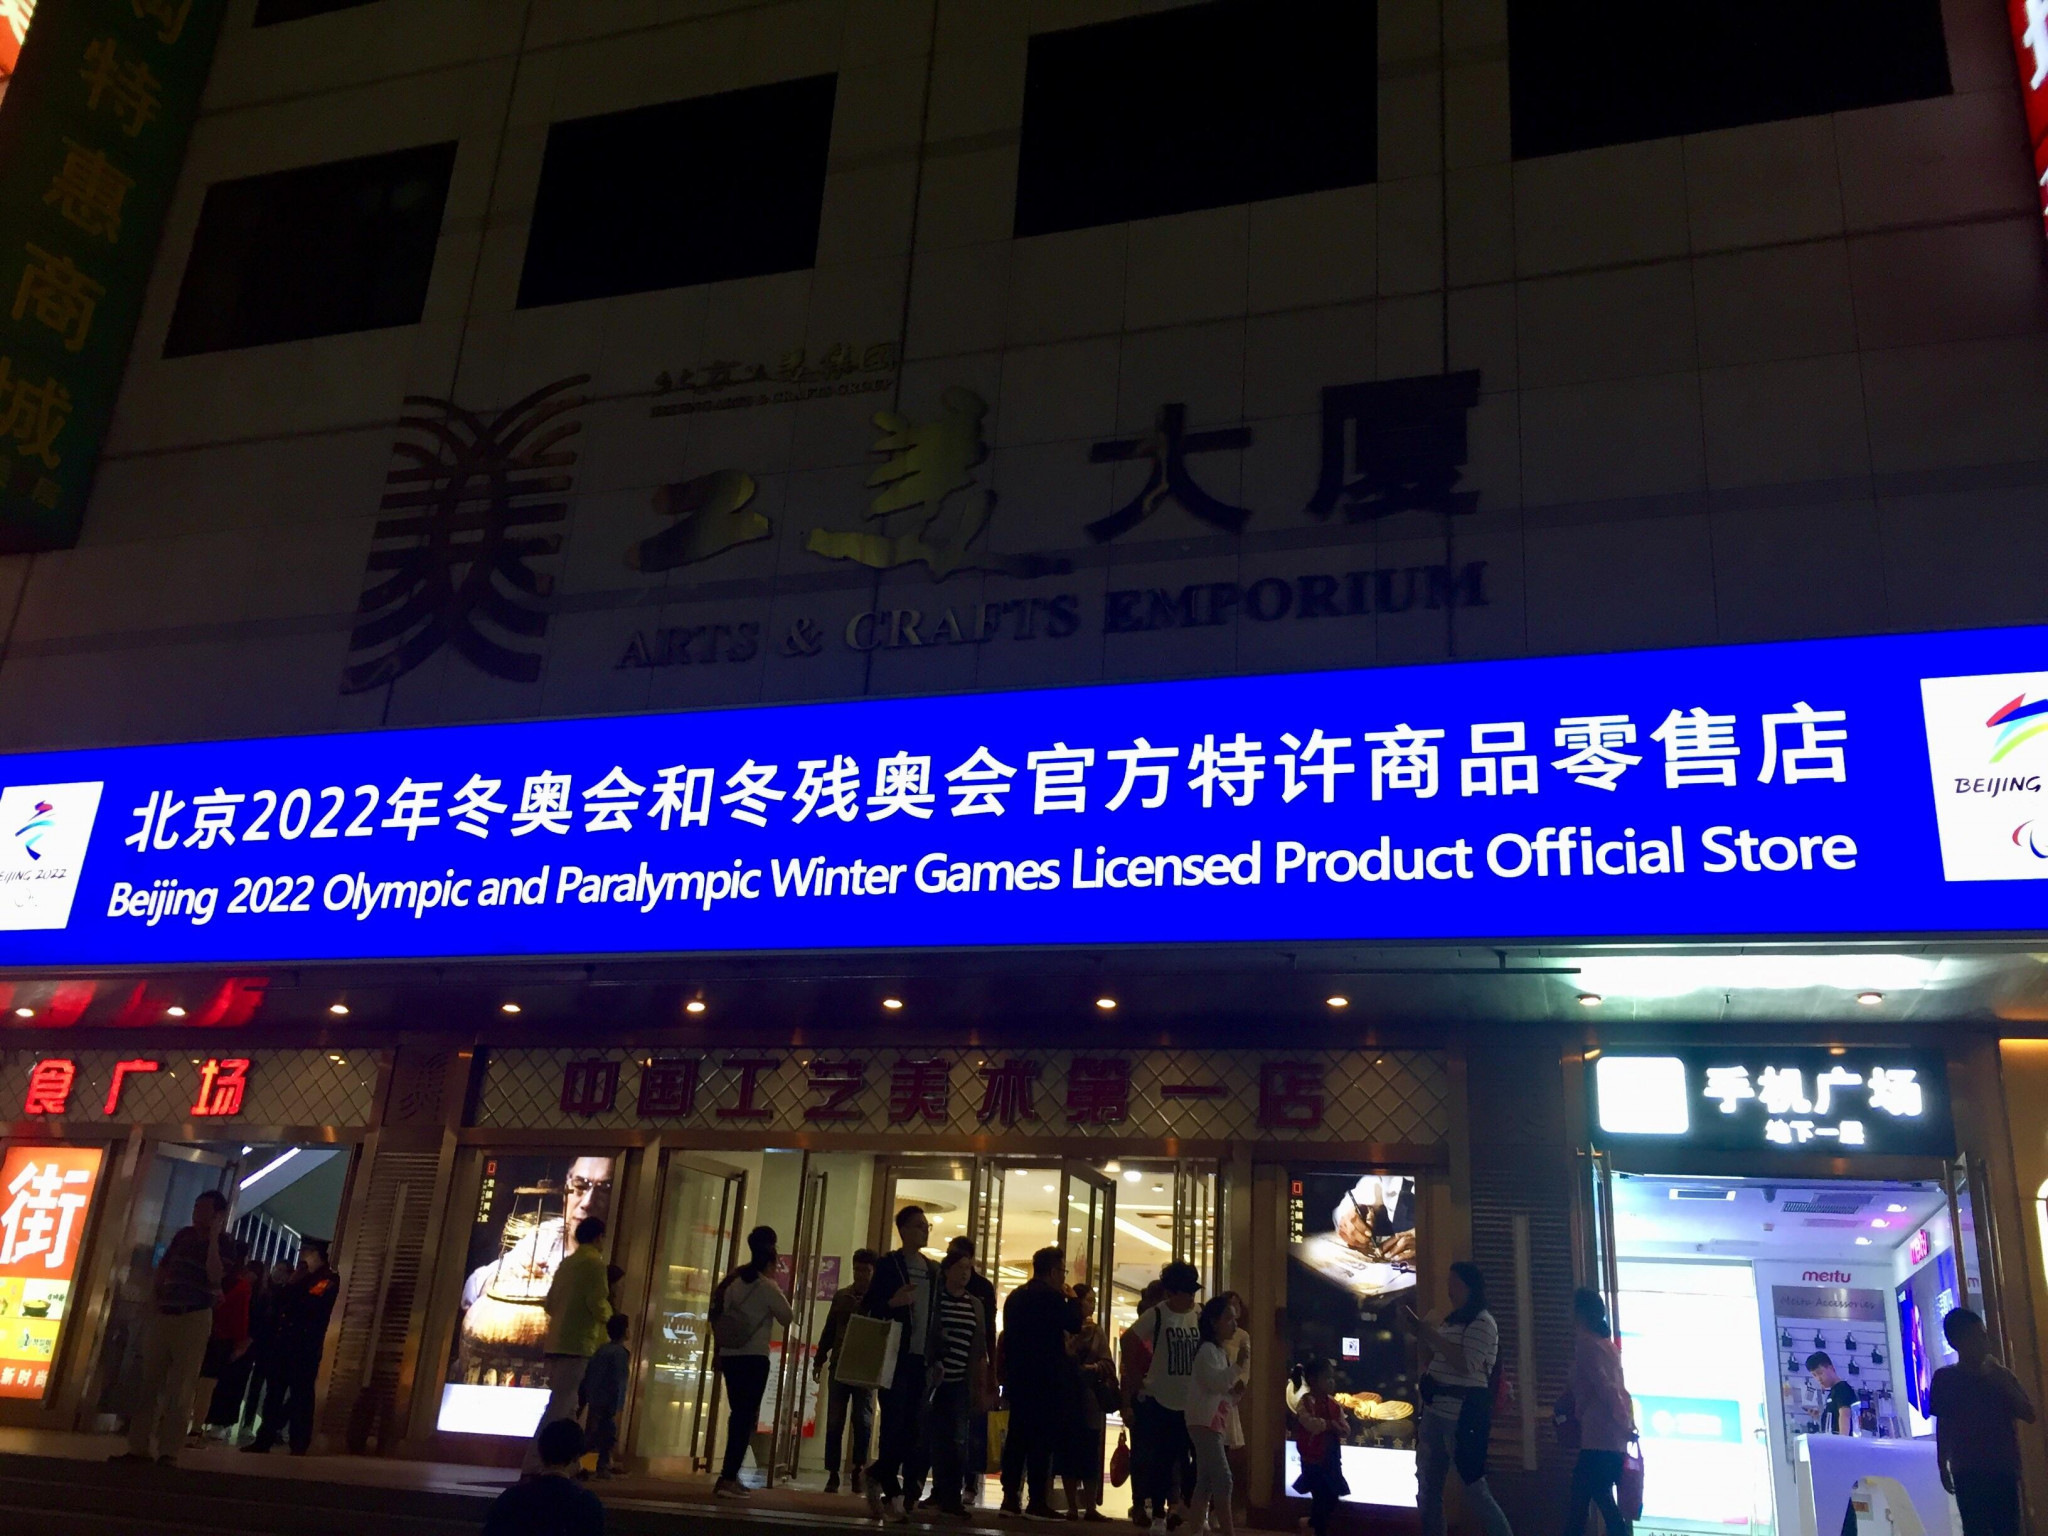 Shops selling official Beijing 2022 merchandise are beginning to pop up across the Chinese capital ©Beijing 2022